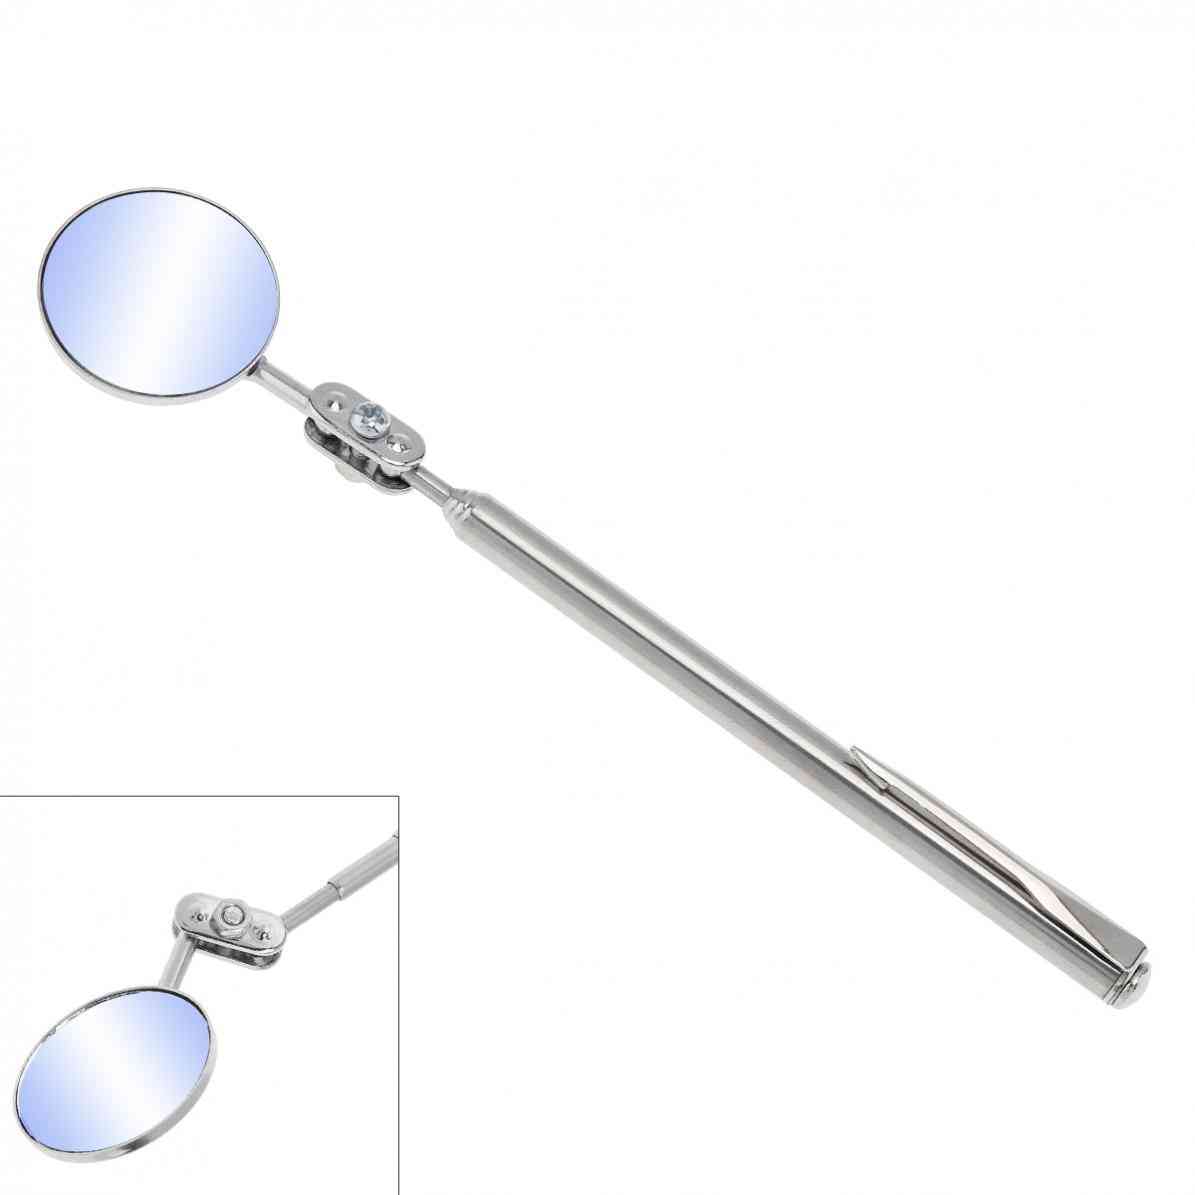 Round Mirror Telescoping Inspection Extending Swivel View Car Hand Tool